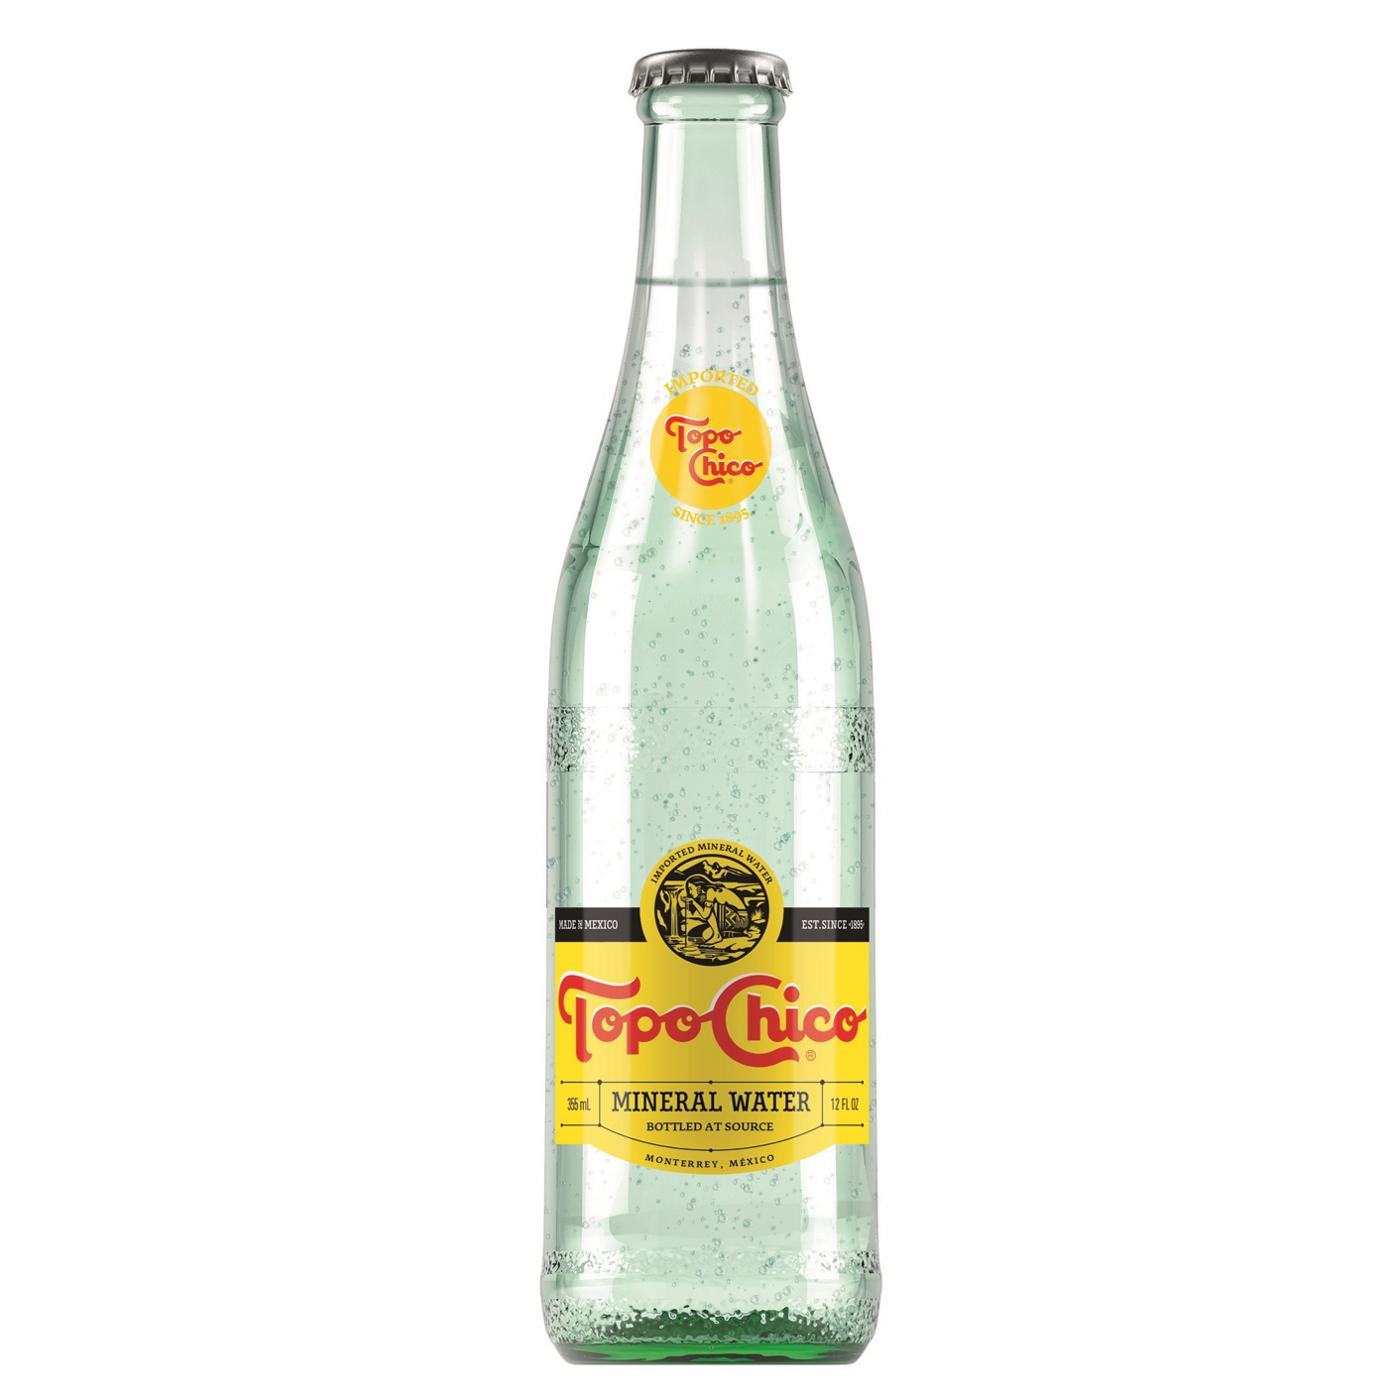 Topo Chico Sparkling Mineral Water; image 1 of 2